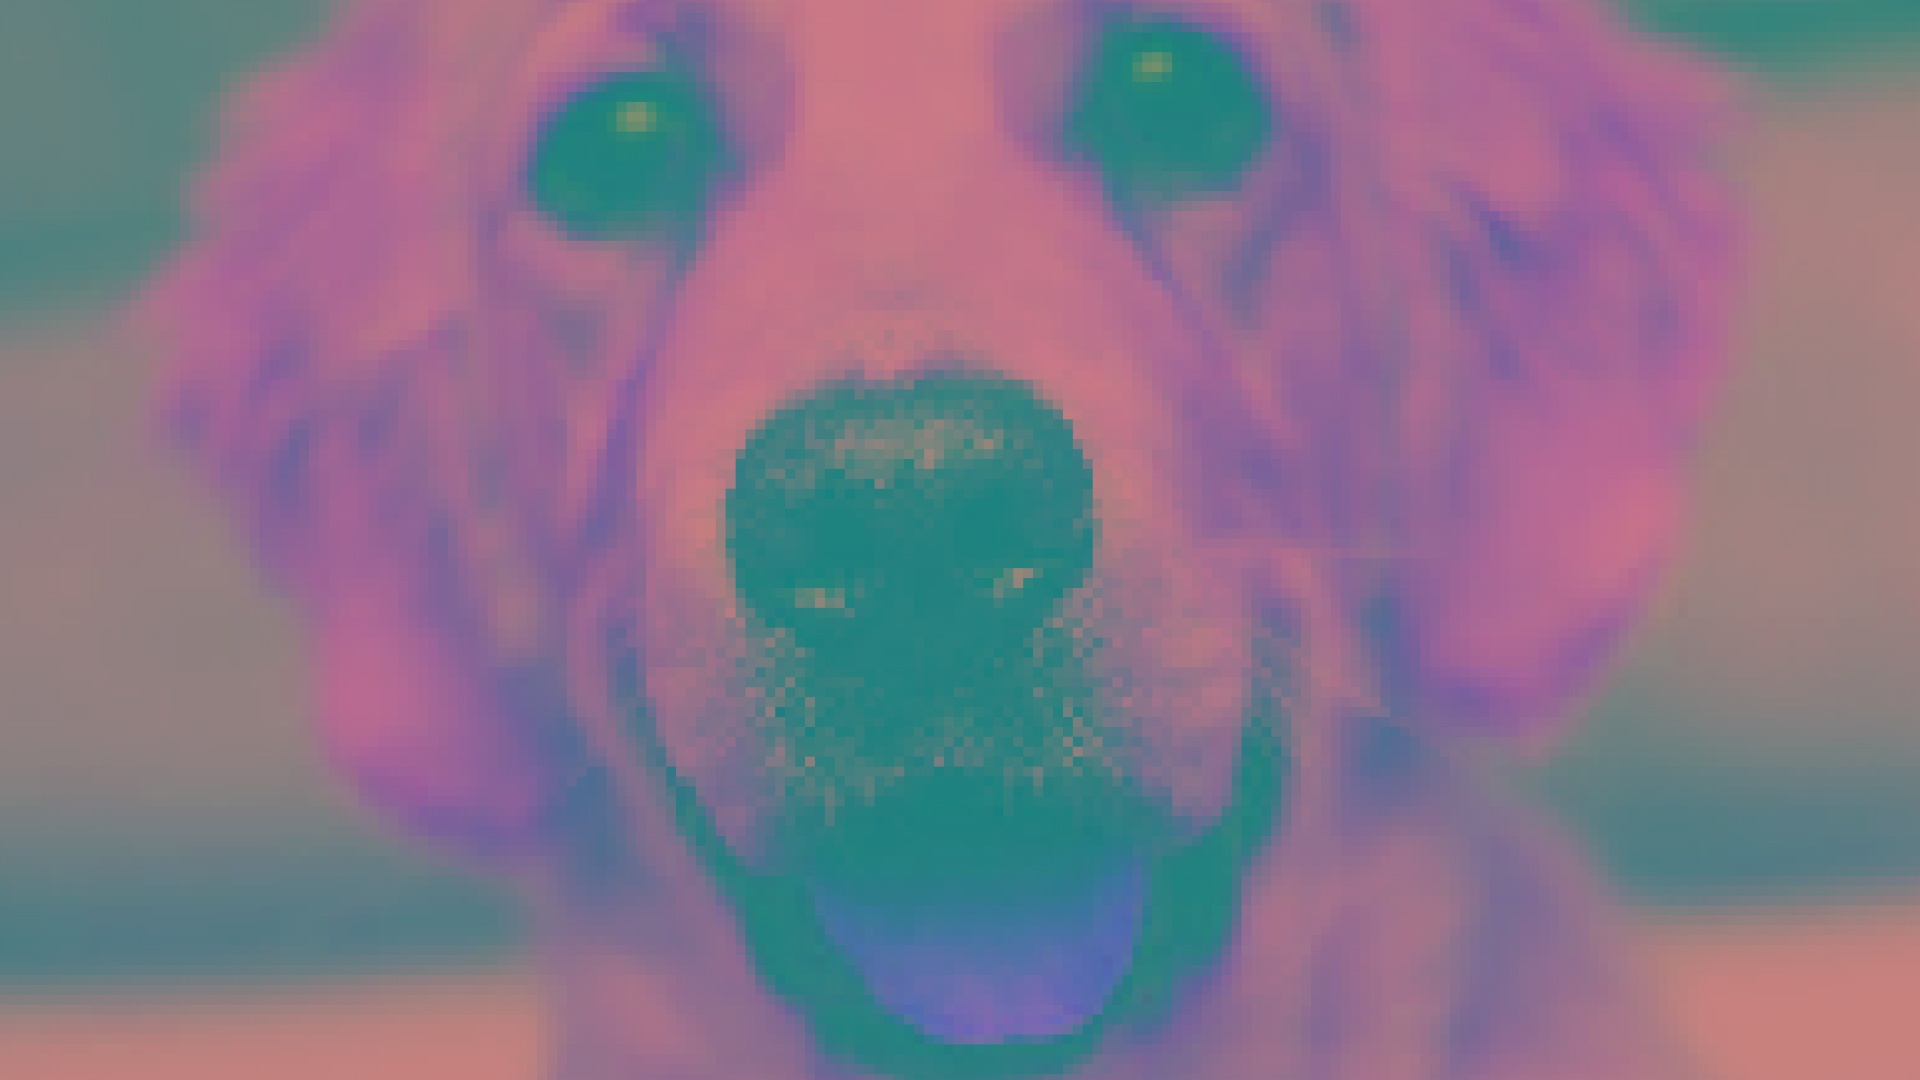 DALI  supports color space conversion operations using an image of a dog smiling